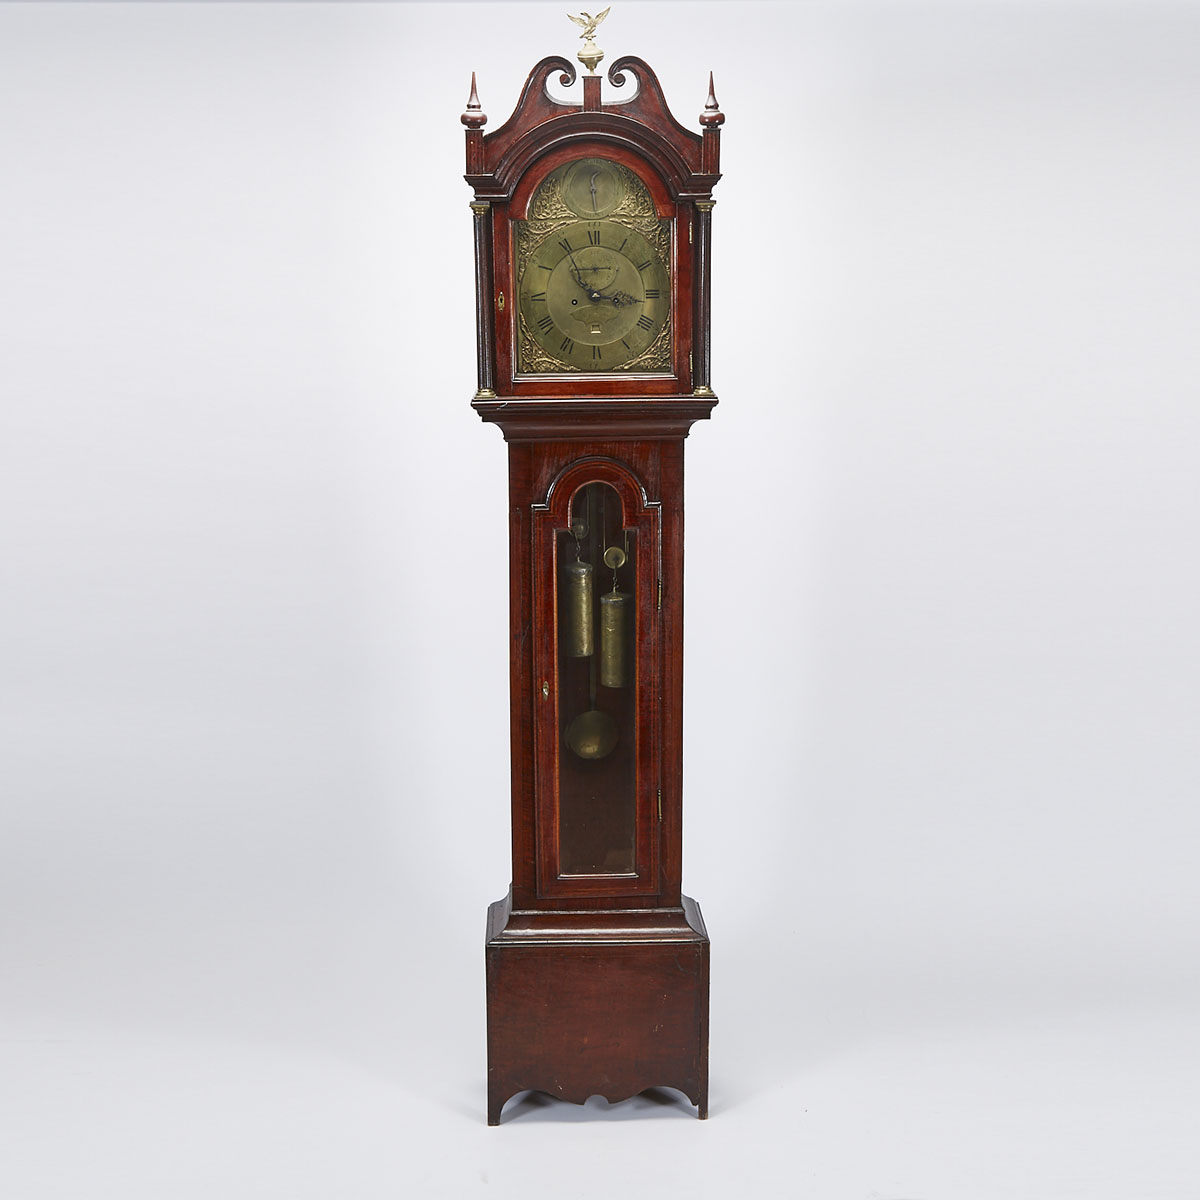 English Tall Case Clock, James Chater & Son, London, c.1750                                                                                                                                                                                                                                                                                                                                                                                                                                                                                                                                                                          